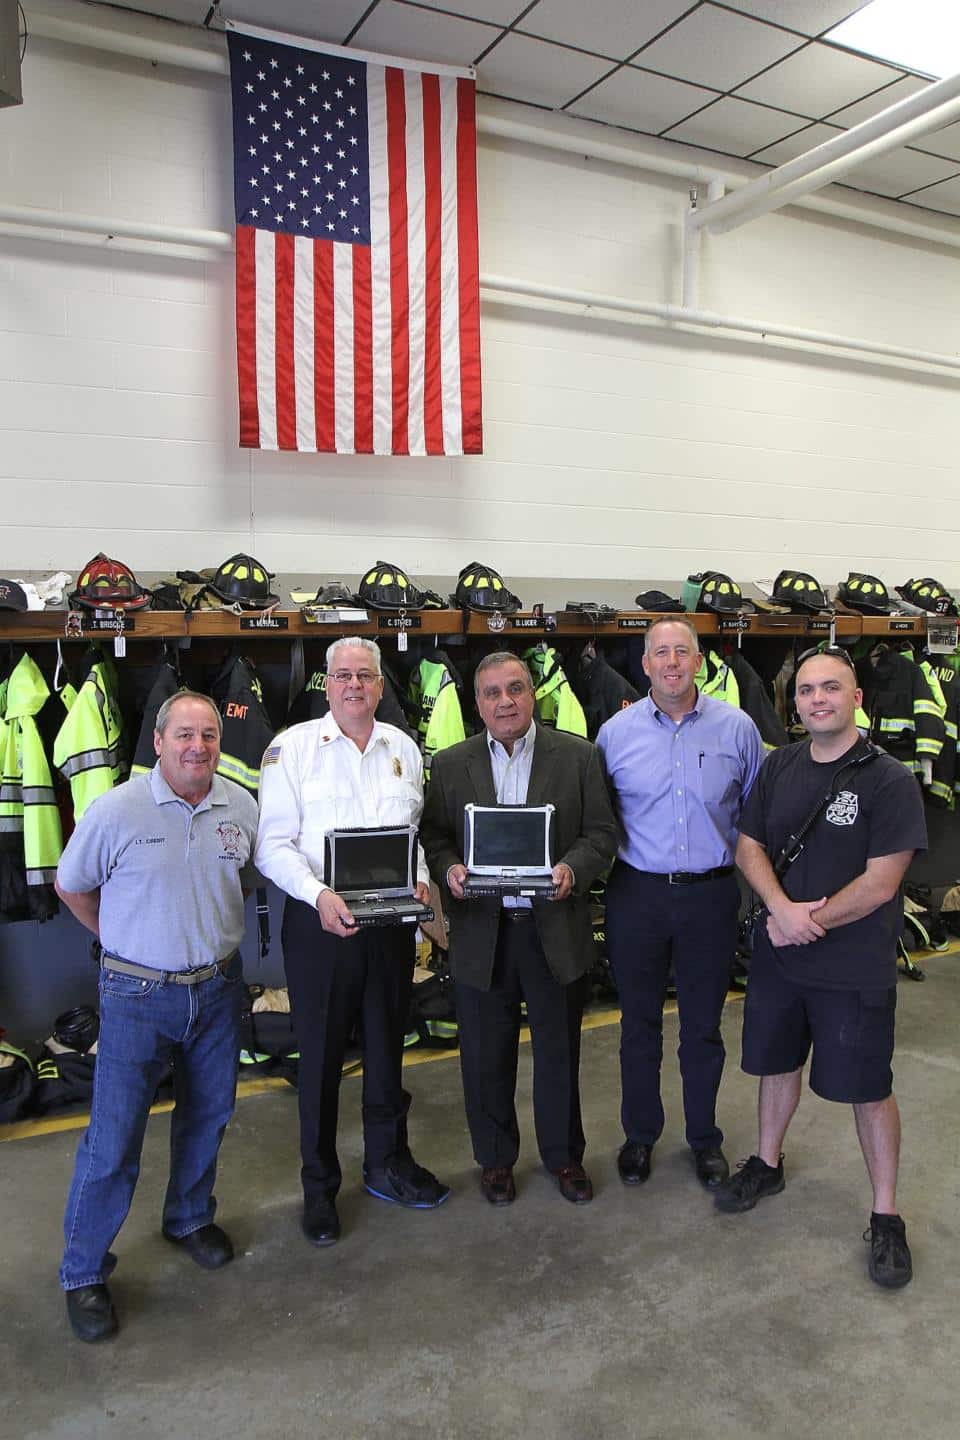 Trinity EMS donated multiple computers to the Groveland Fire Department. Left to right: Lt. Al Credit, Chief Robert Lay, Trinity President and Co-Owner John Chemaly, Christopher Dick, Director of Business Development and Marketing, and Firefighter Taylor Balletto. (Courtesy Photo)